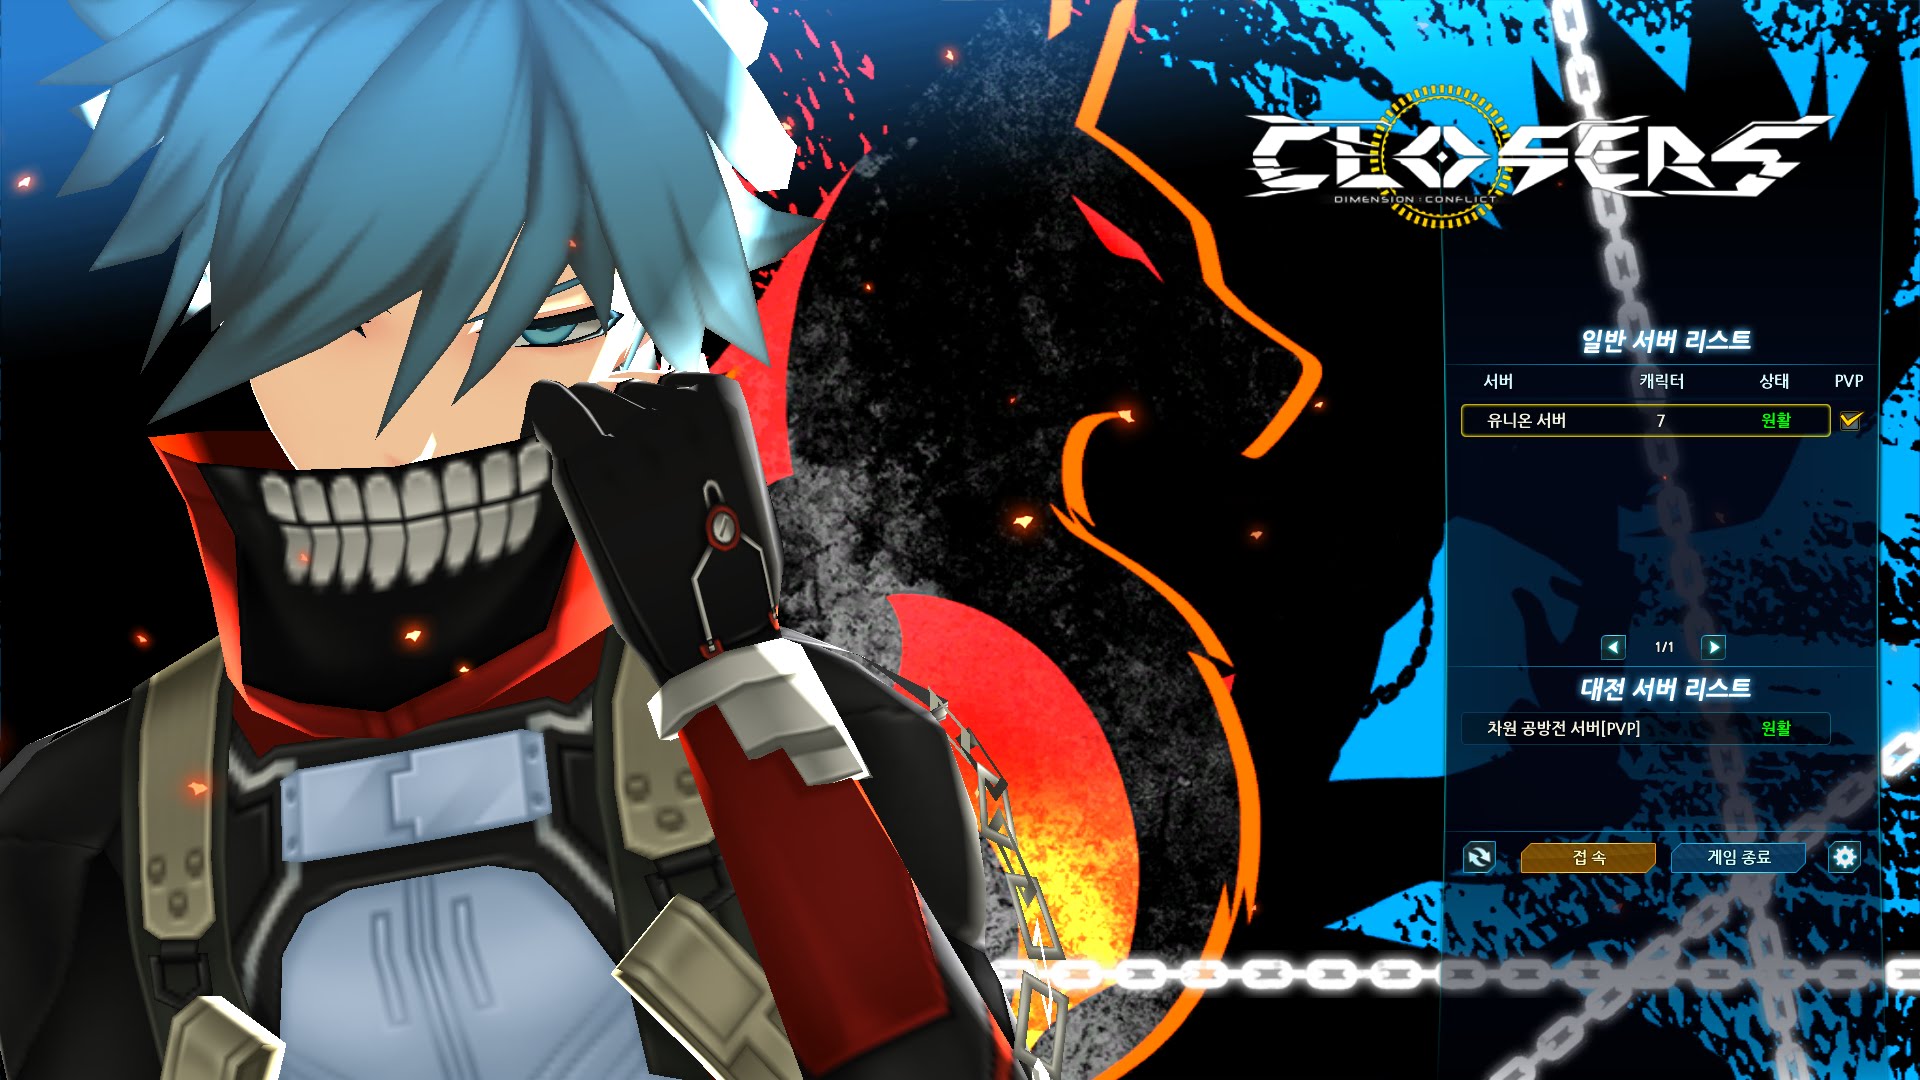 Closers official 00